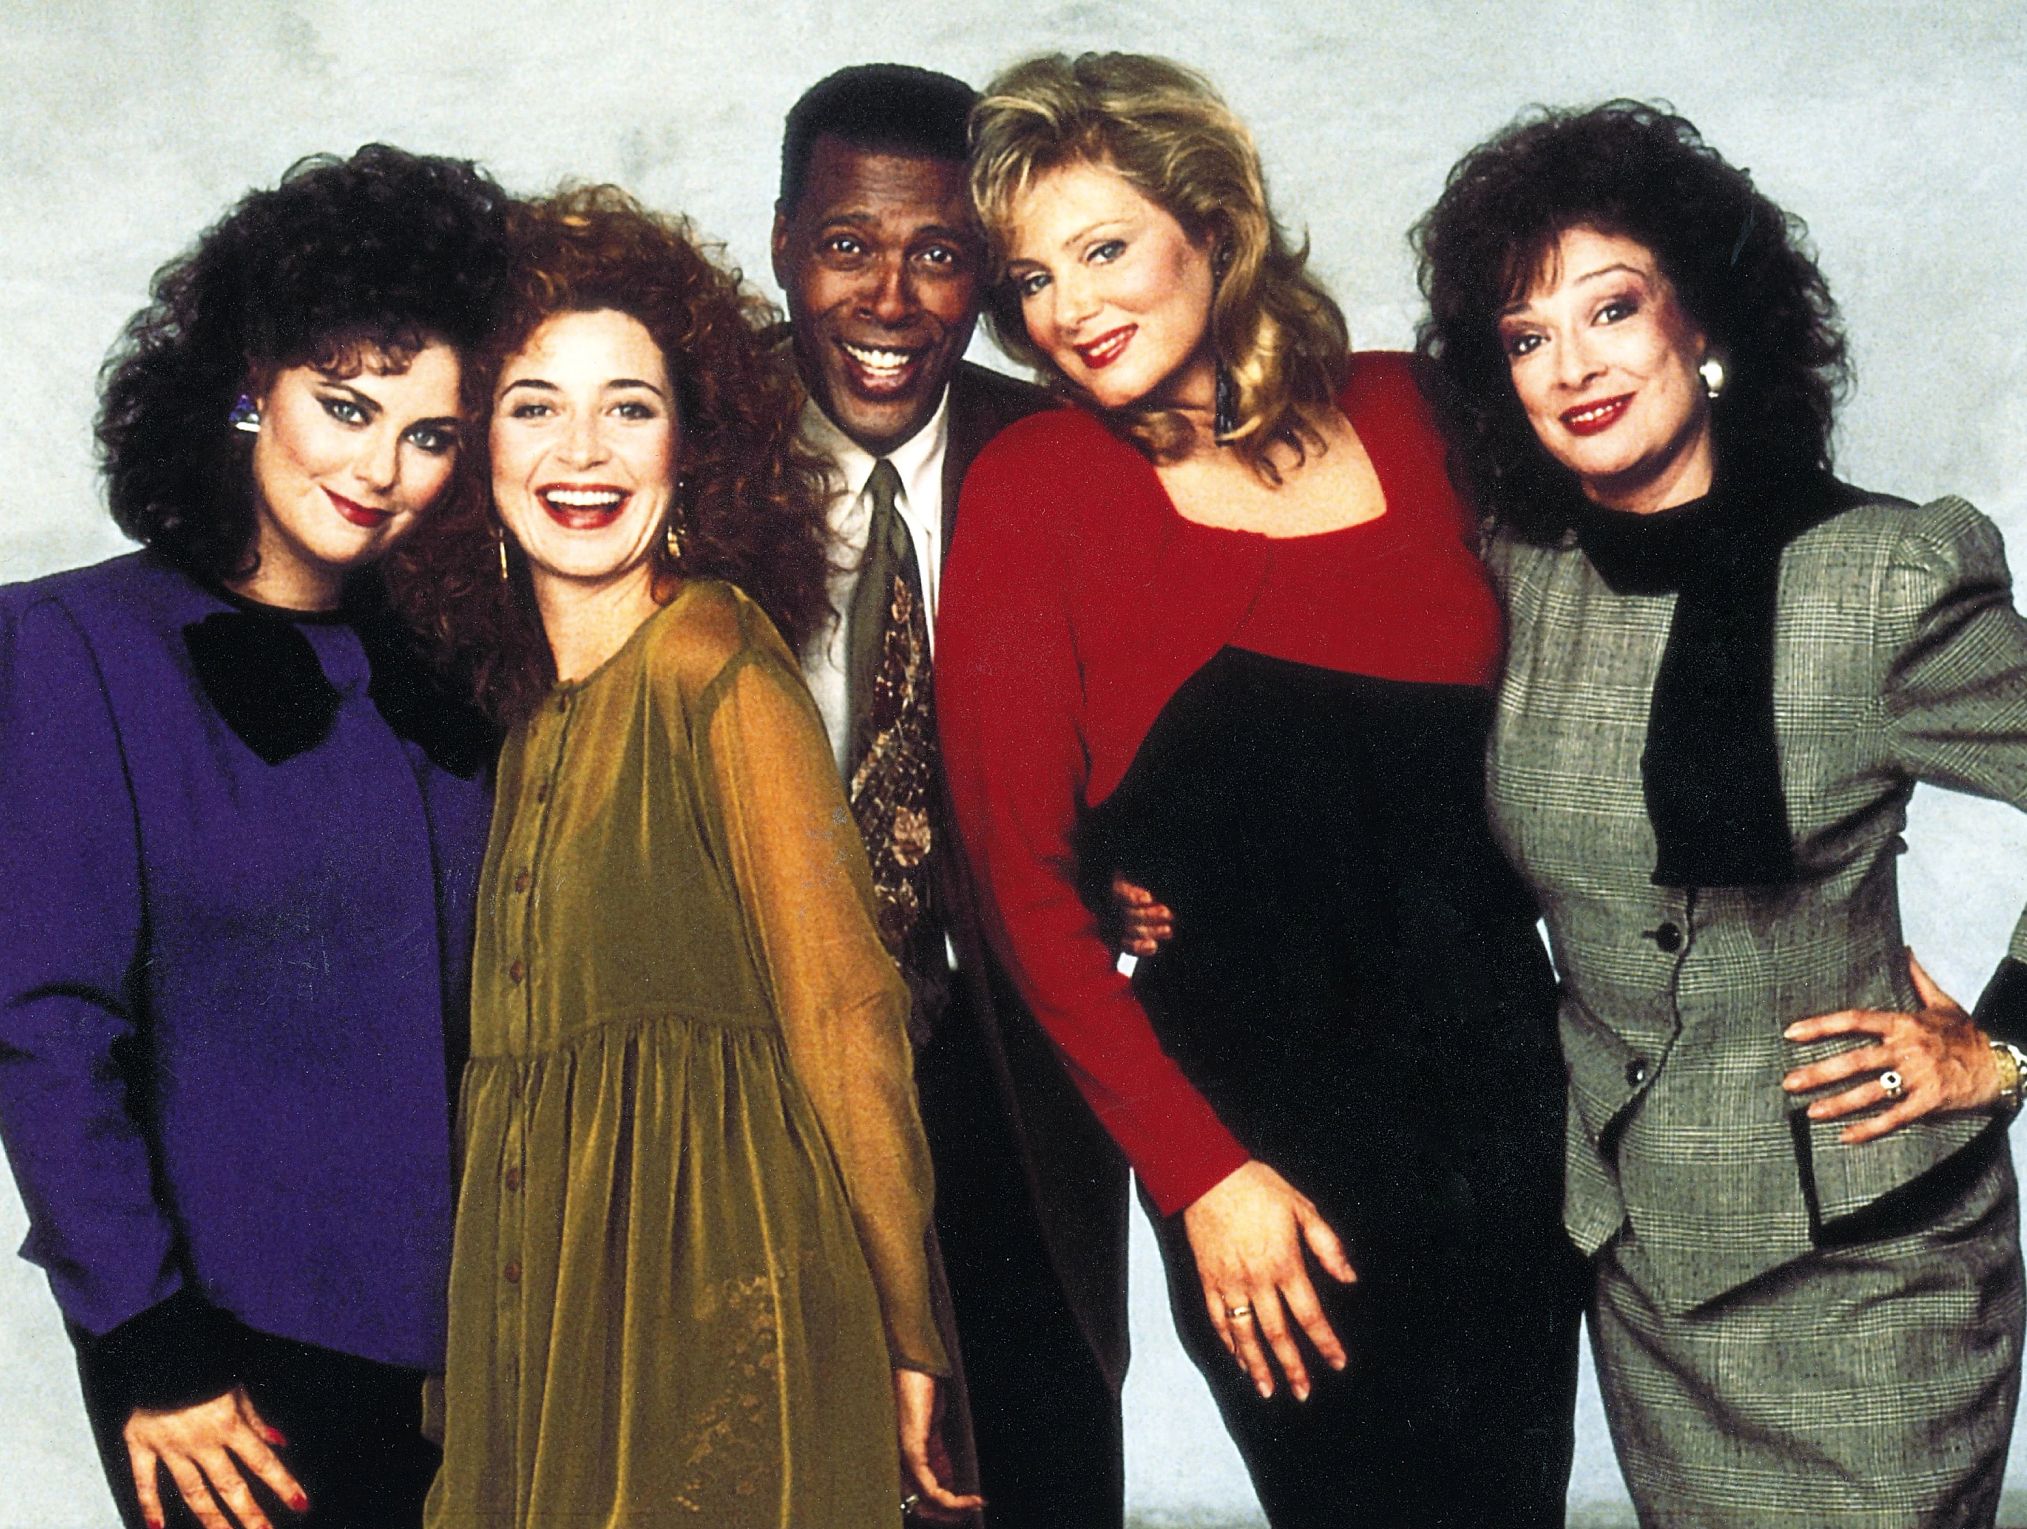 Delta Burke, Annie Potts, Meshach Taylor, Jean Smart and Dixie Carter pose for a portrait together for Designing Women